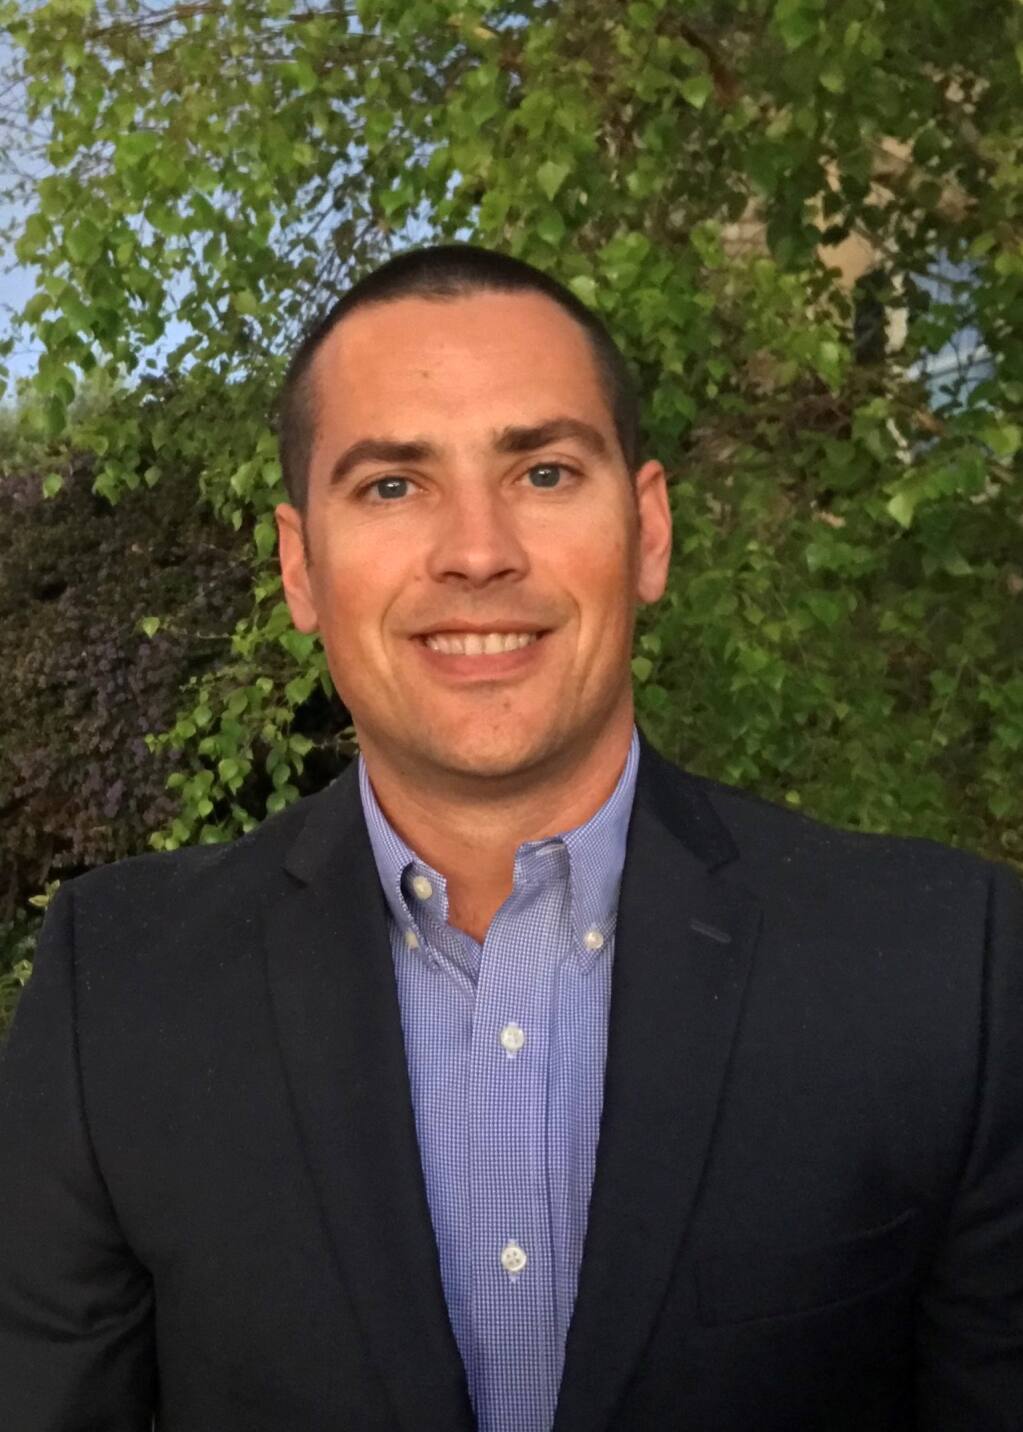 Michael Brughelli was hired by Bank of Marin as vice president and market officer for the wine lending group on the Central Coast. (courtesy photo)